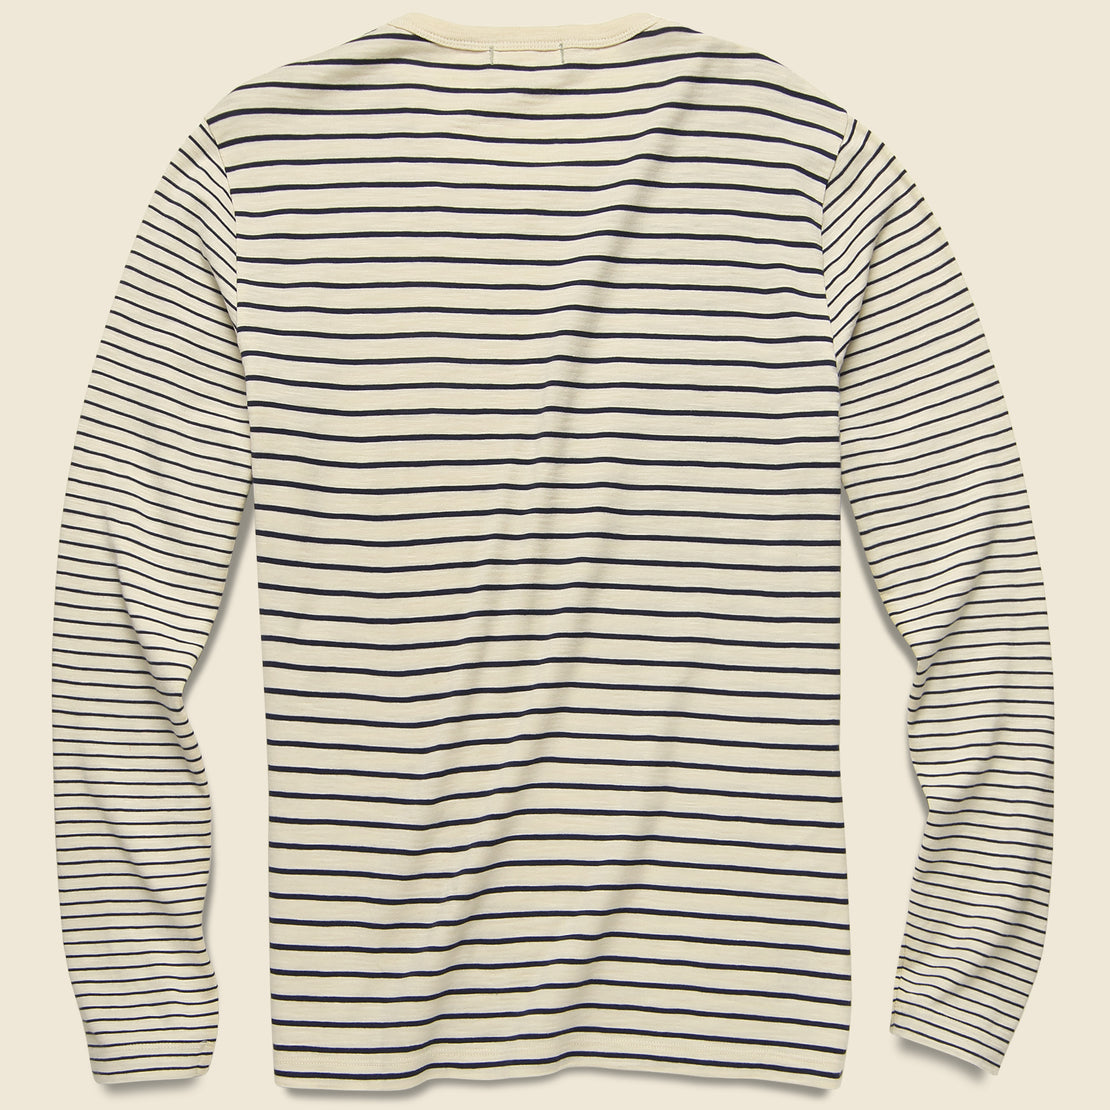 Mixed Stripe Pocket Tee - Canvas/Navy - Alex Mill - STAG Provisions - Tops - L/S Tee